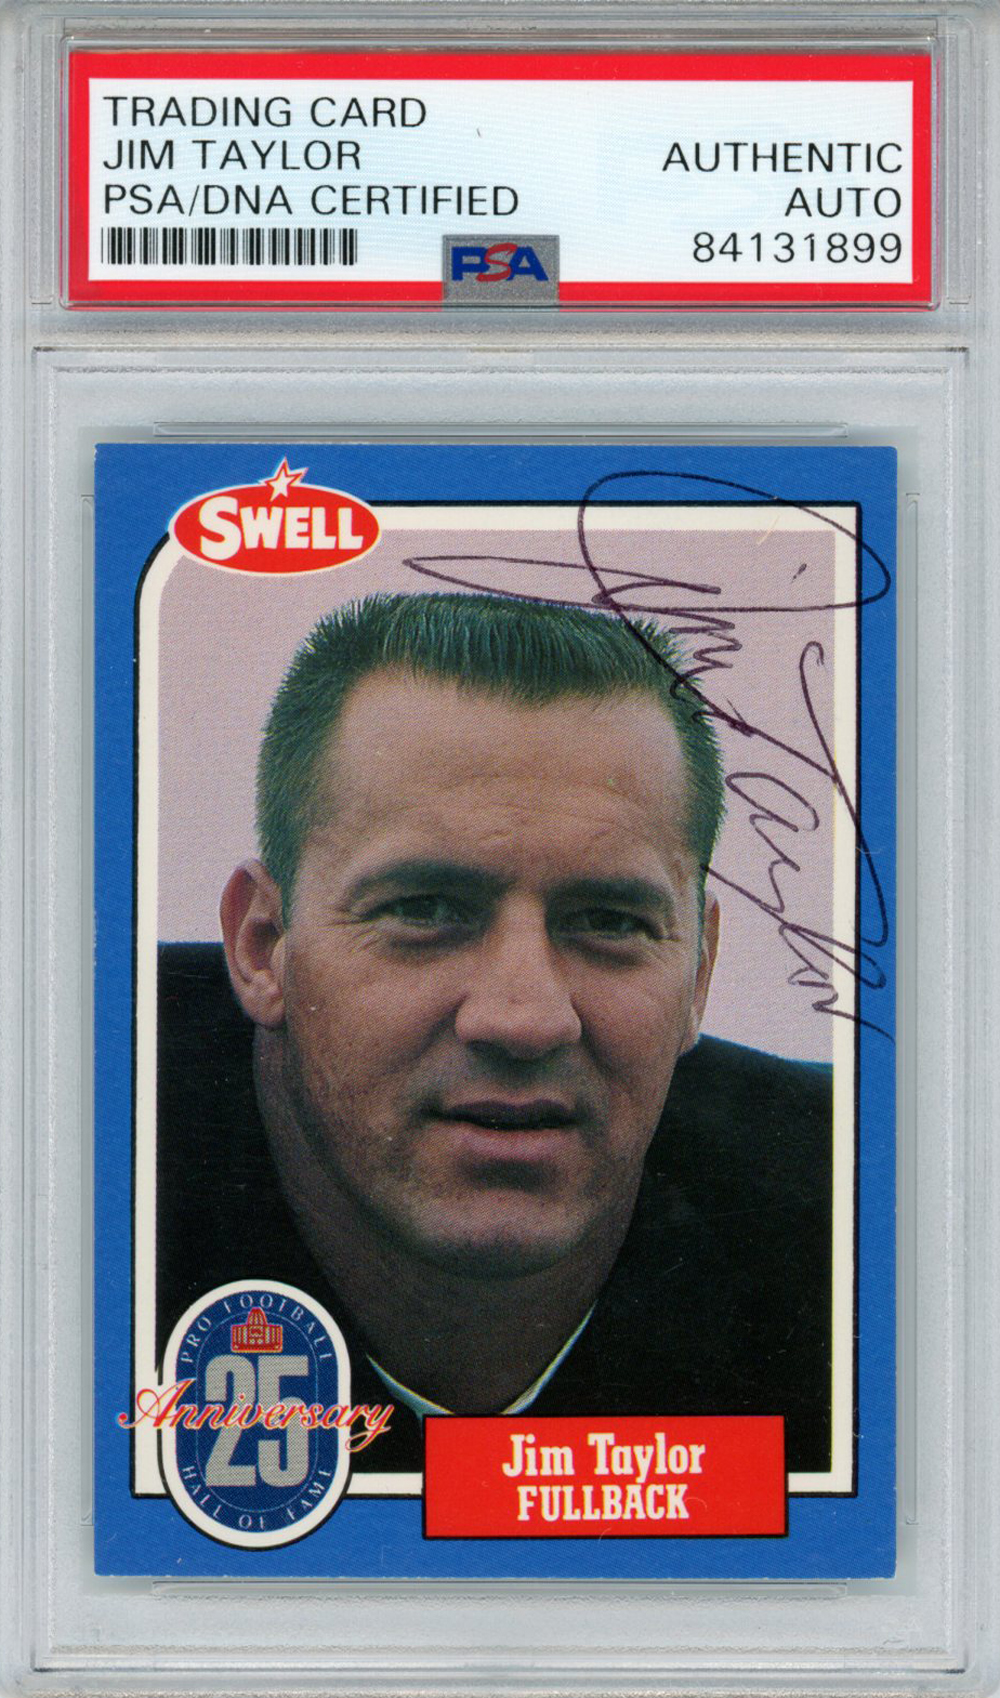 Jim Taylor Autographed/Signed 1988 Swell #113 Trading Card PSA Slab 33004